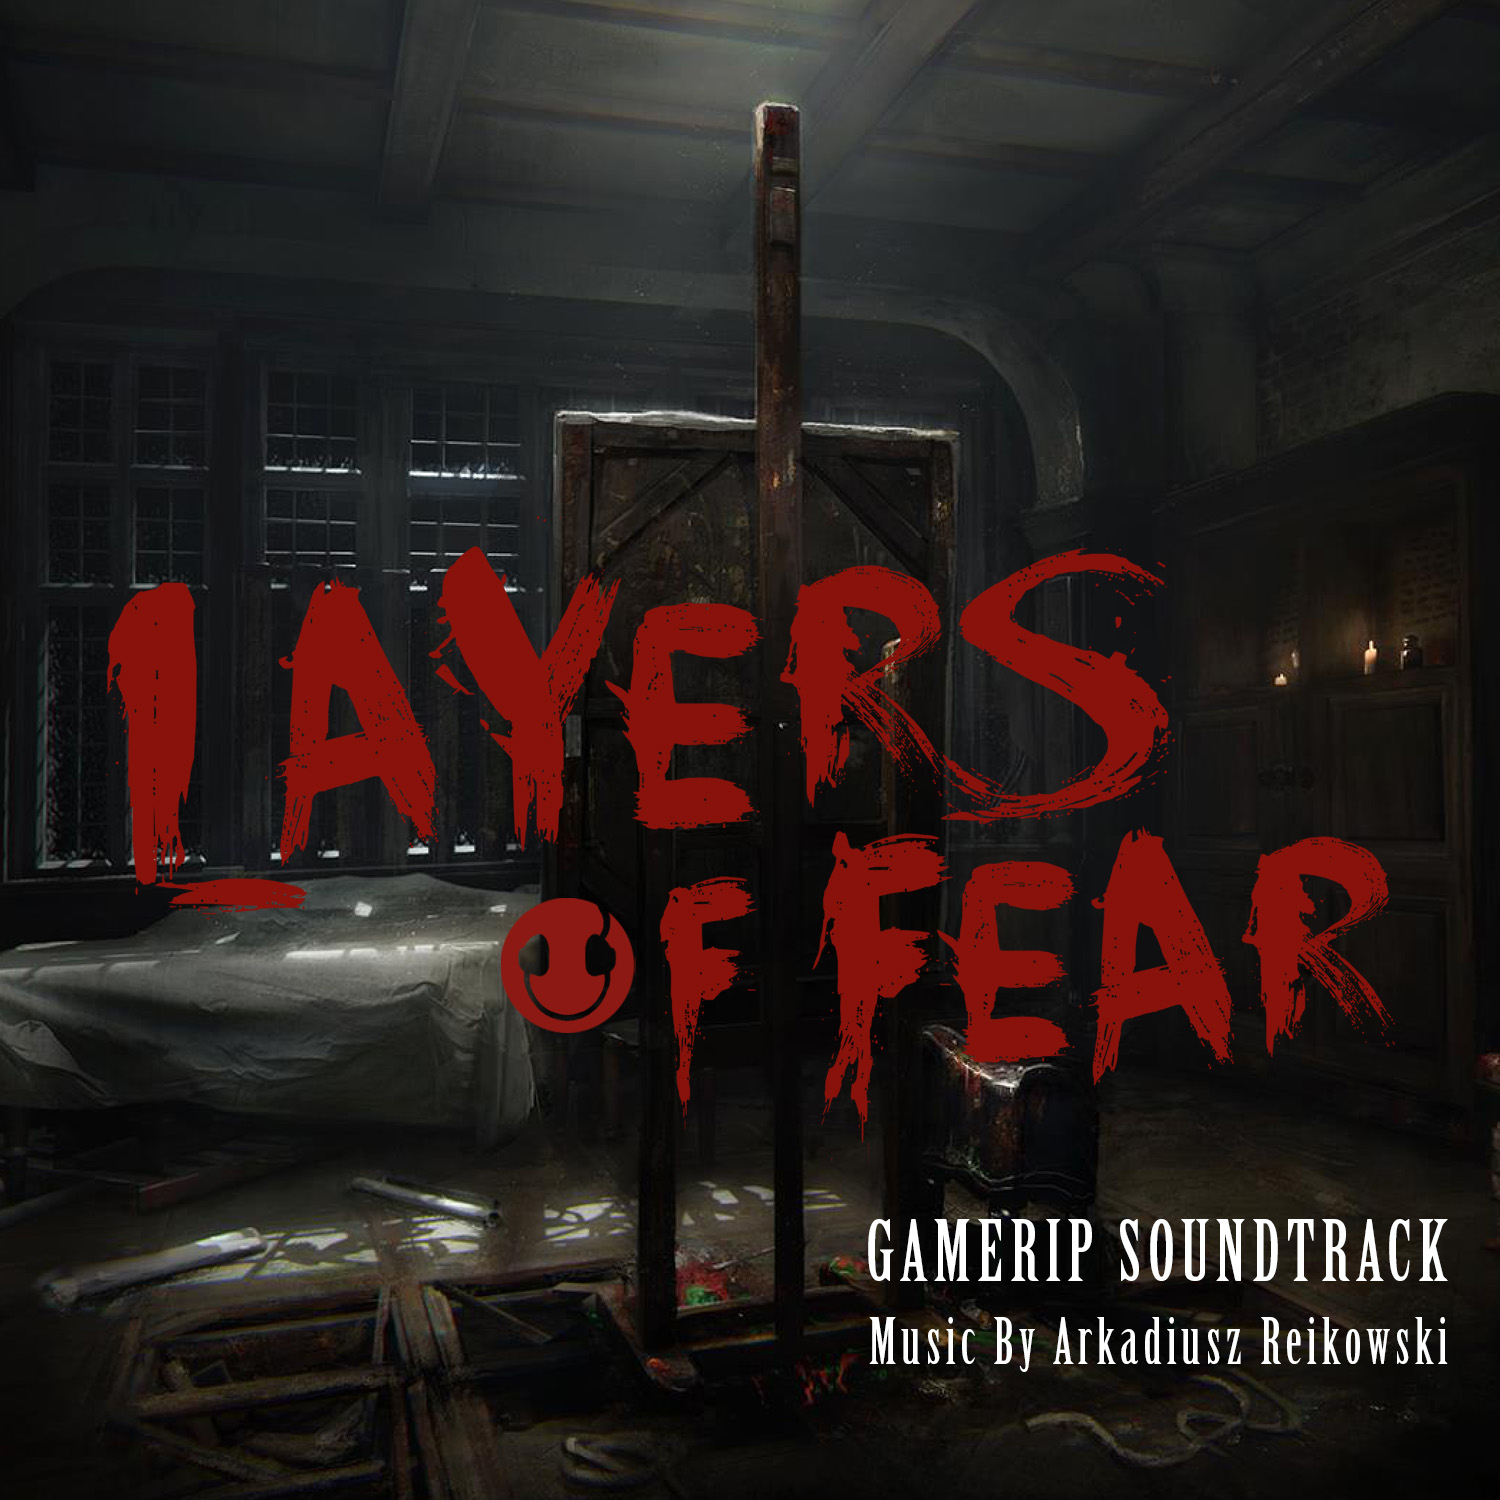 Layers of Fear (Windows, Switch, PS4, Xbox One, MacOS, Linux) (gamerip)  (2016) MP3 - Download Layers of Fear (Windows, Switch, PS4, Xbox One,  MacOS, Linux) (gamerip) (2016) Soundtracks for FREE!